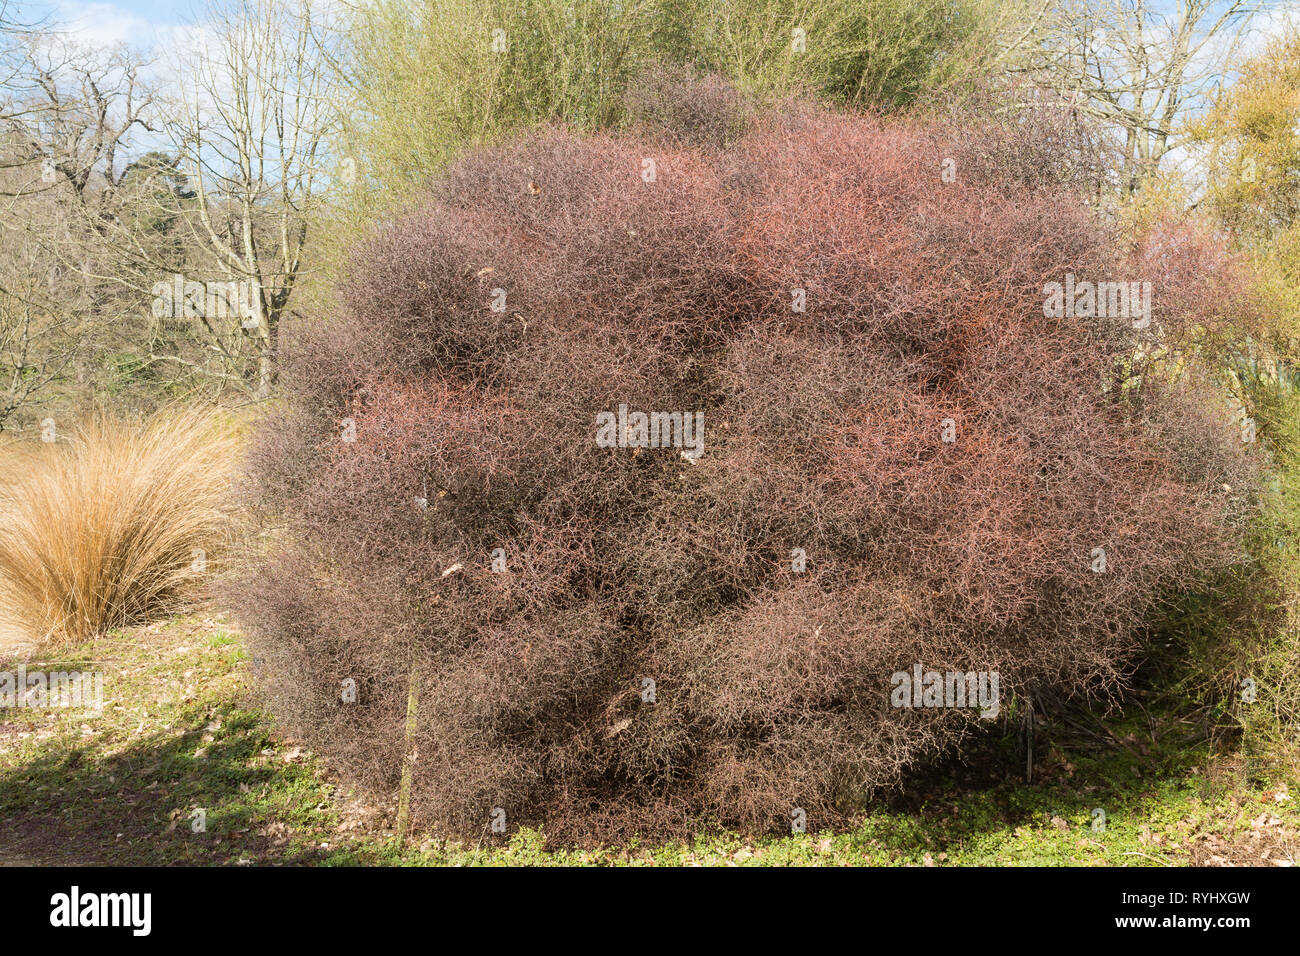 Muehlenbeckia astonii or shrubby tororaro (wirebrush), an endemic New Zealand shrub in the family Polygonaceae, in a UK garden during March. Stock Photo